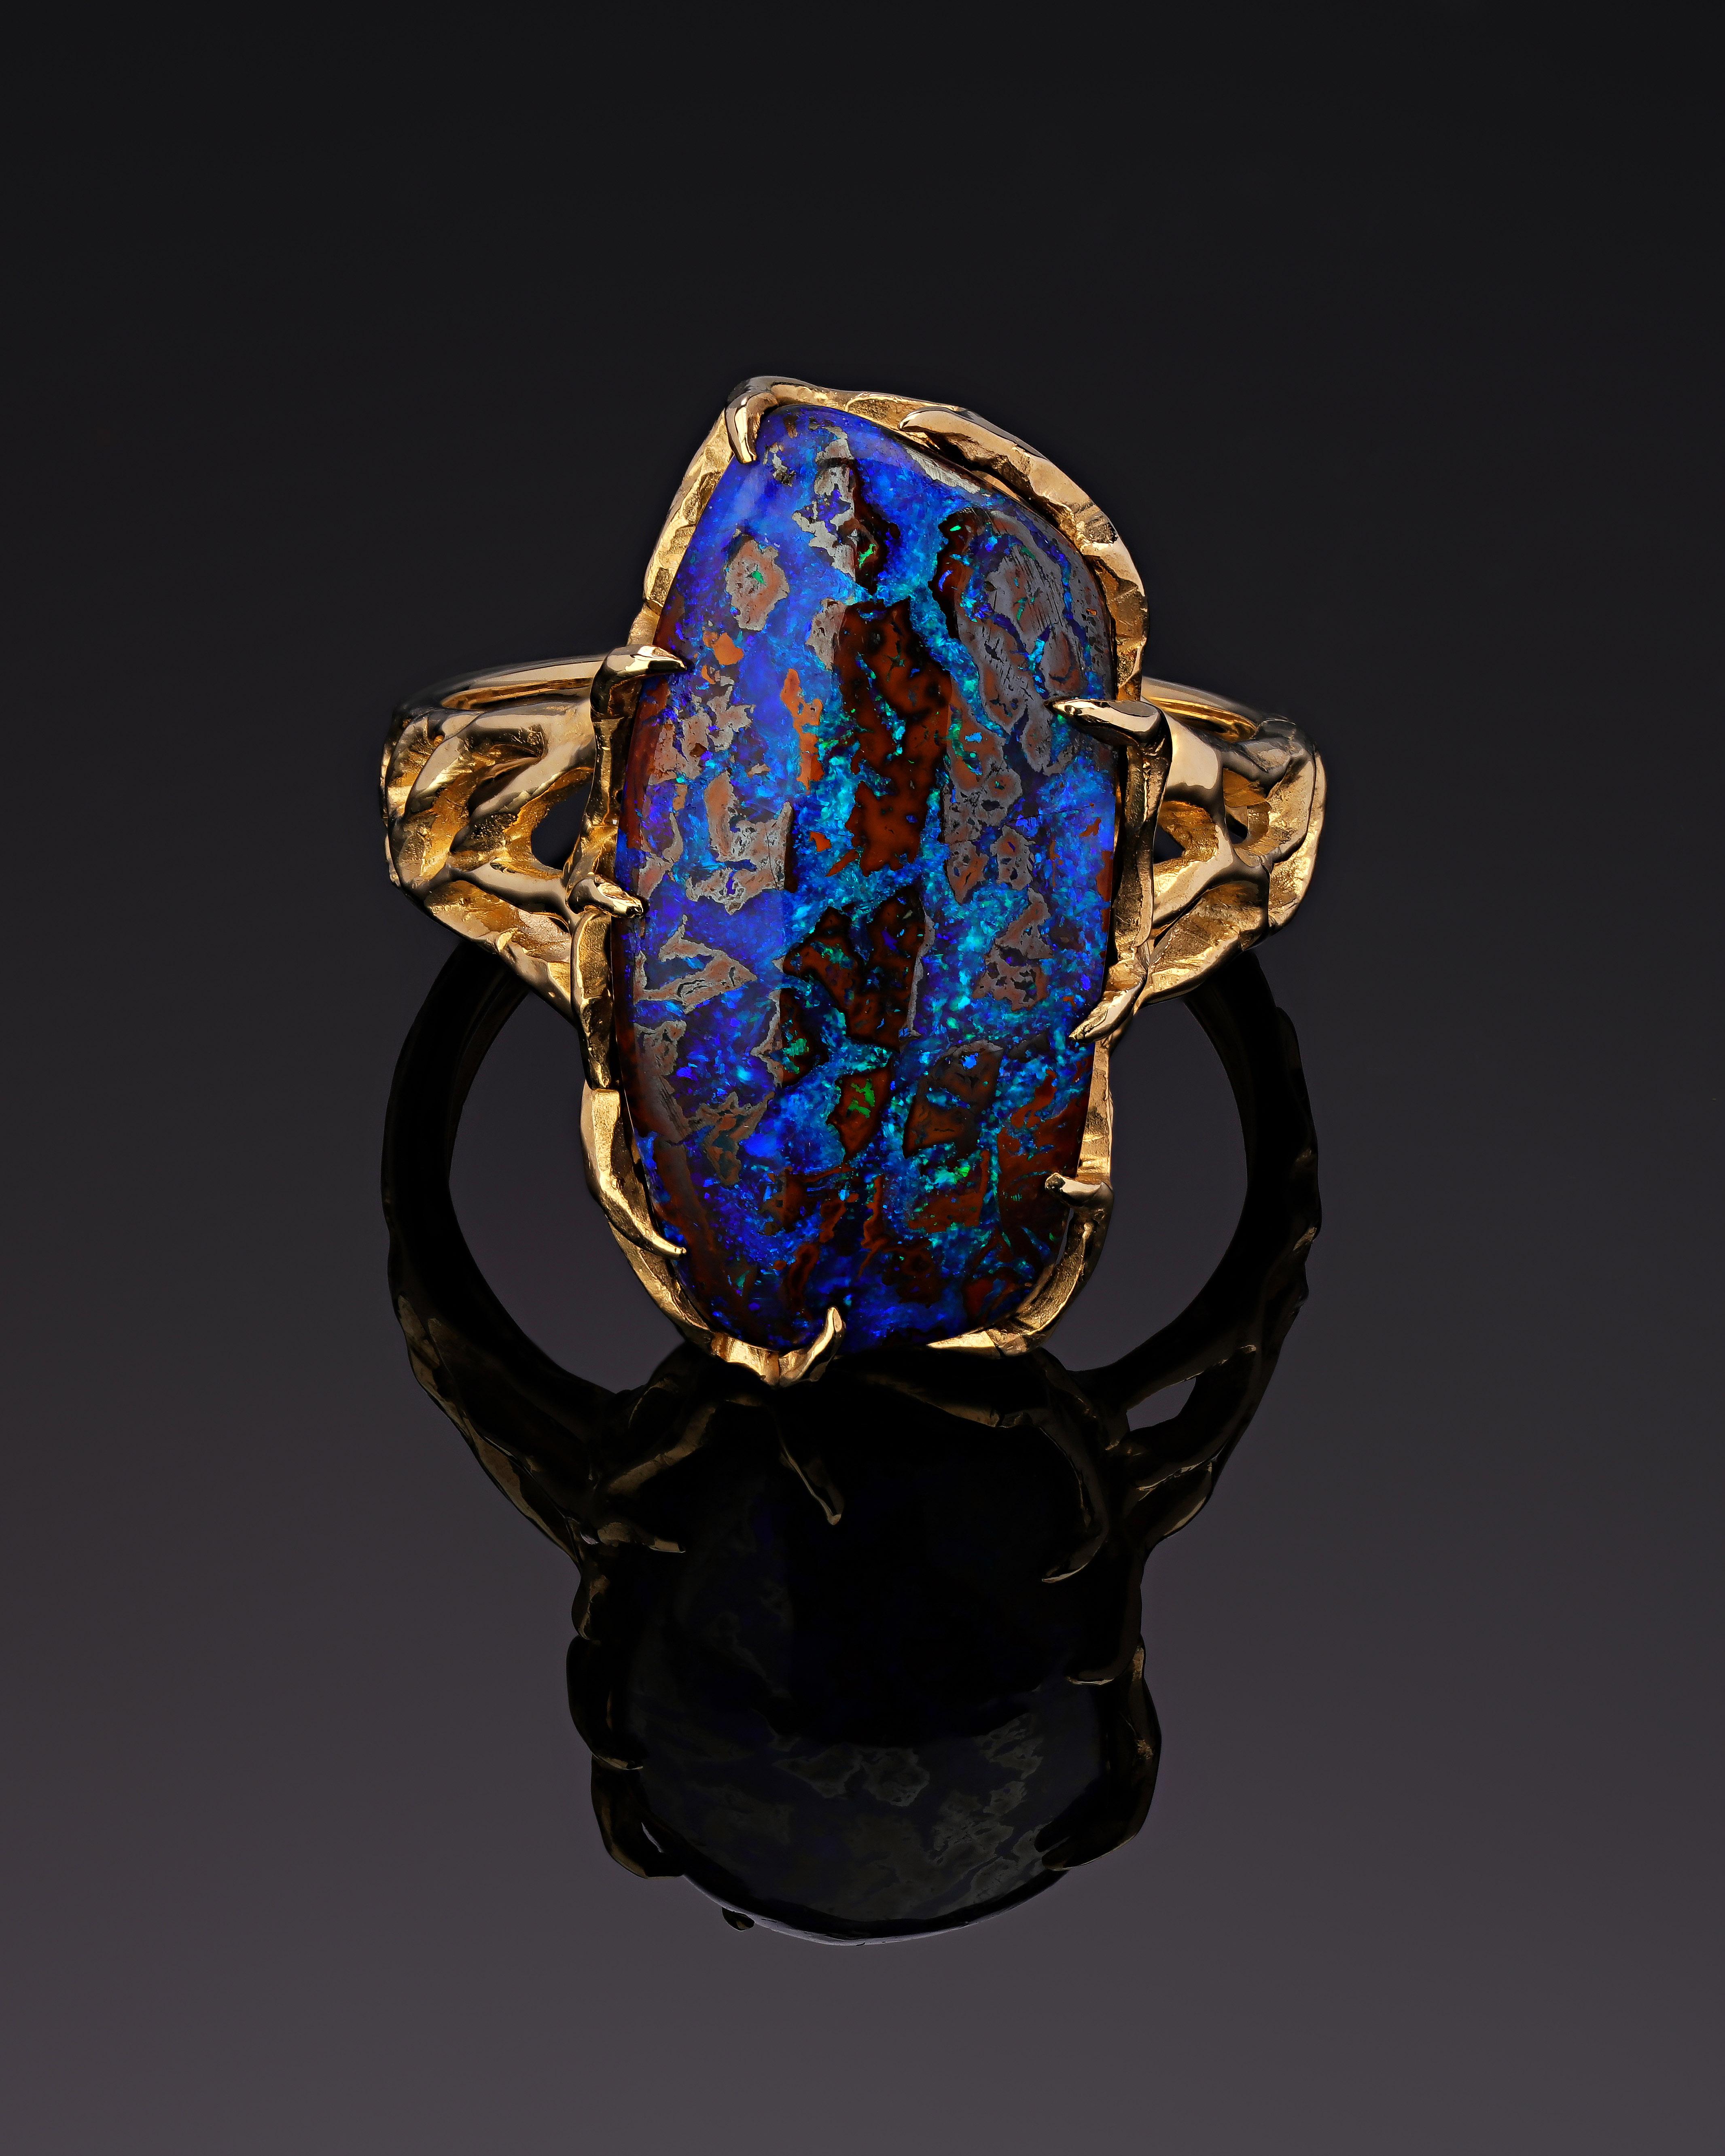 14K yellow gold ring with unique Boulder Opal 
Opal origin - Australia
Opal measurements - 0,24 х 0.0,43 х 0,79 in / 6 х 11 х 20 mm
stone weight - 12.70 carats
ring weight - 6.89 grams
ring size - 7.5 US


We ship our jewelry worldwide – for our